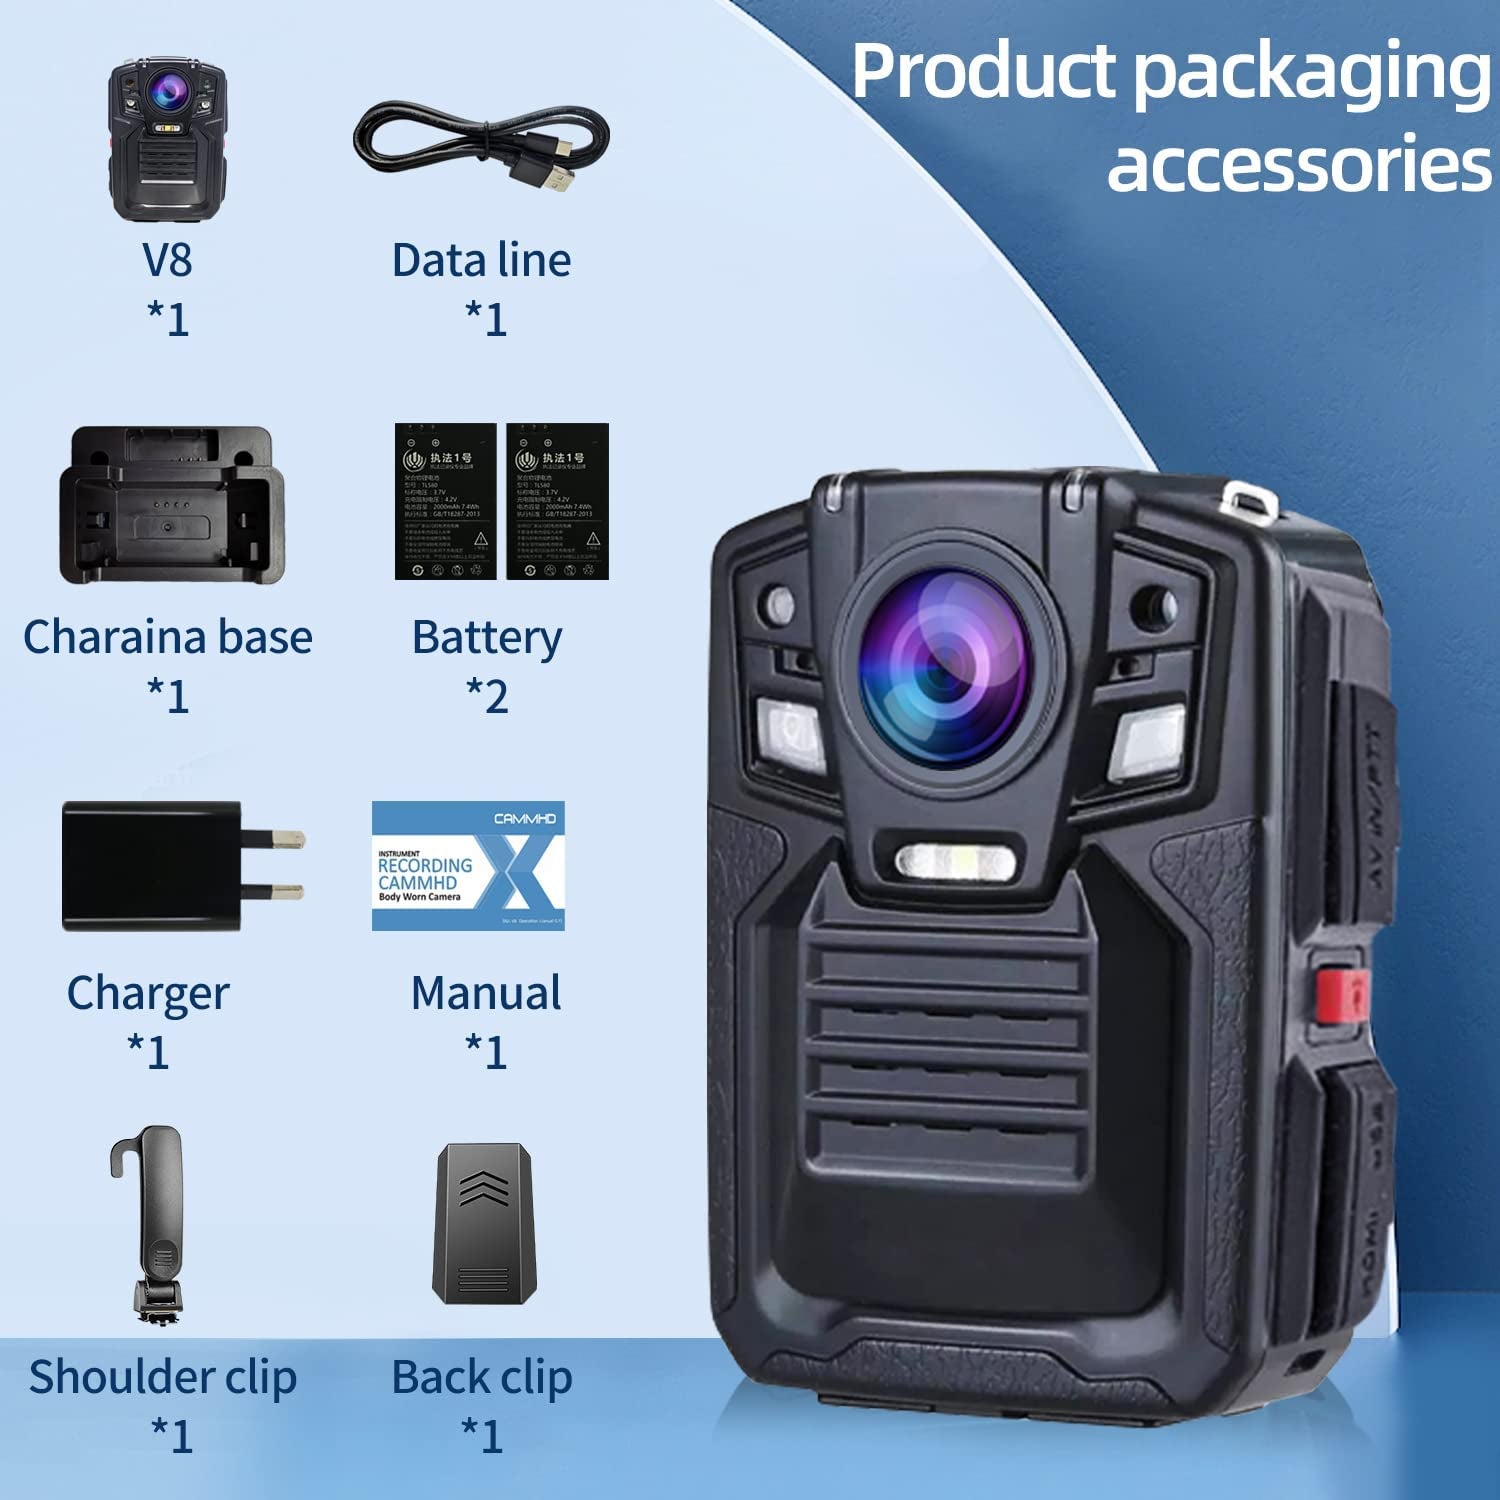 V8-128/256GB Body Camera 1440P, 2 Batteries Working 10 Hours, IP68 Body Camera with Audio and Video Recording Wearable, Night Vision Body Camera Easy to Use (MAX 2160P)